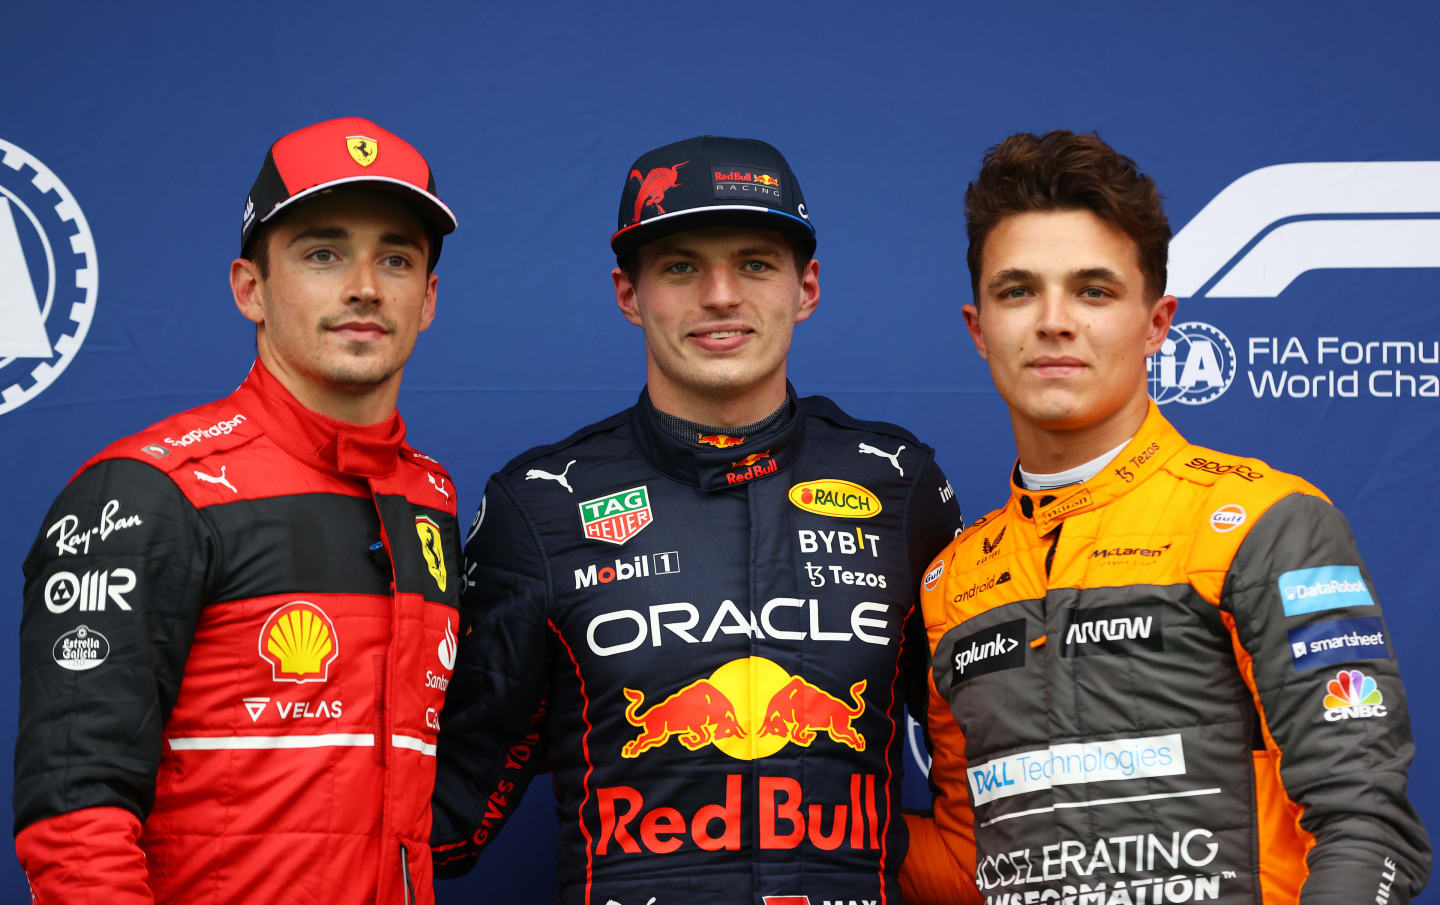 IMOLA, ITALY - APRIL 22: Pole position qualifier Max Verstappen of the Netherlands and Oracle Red